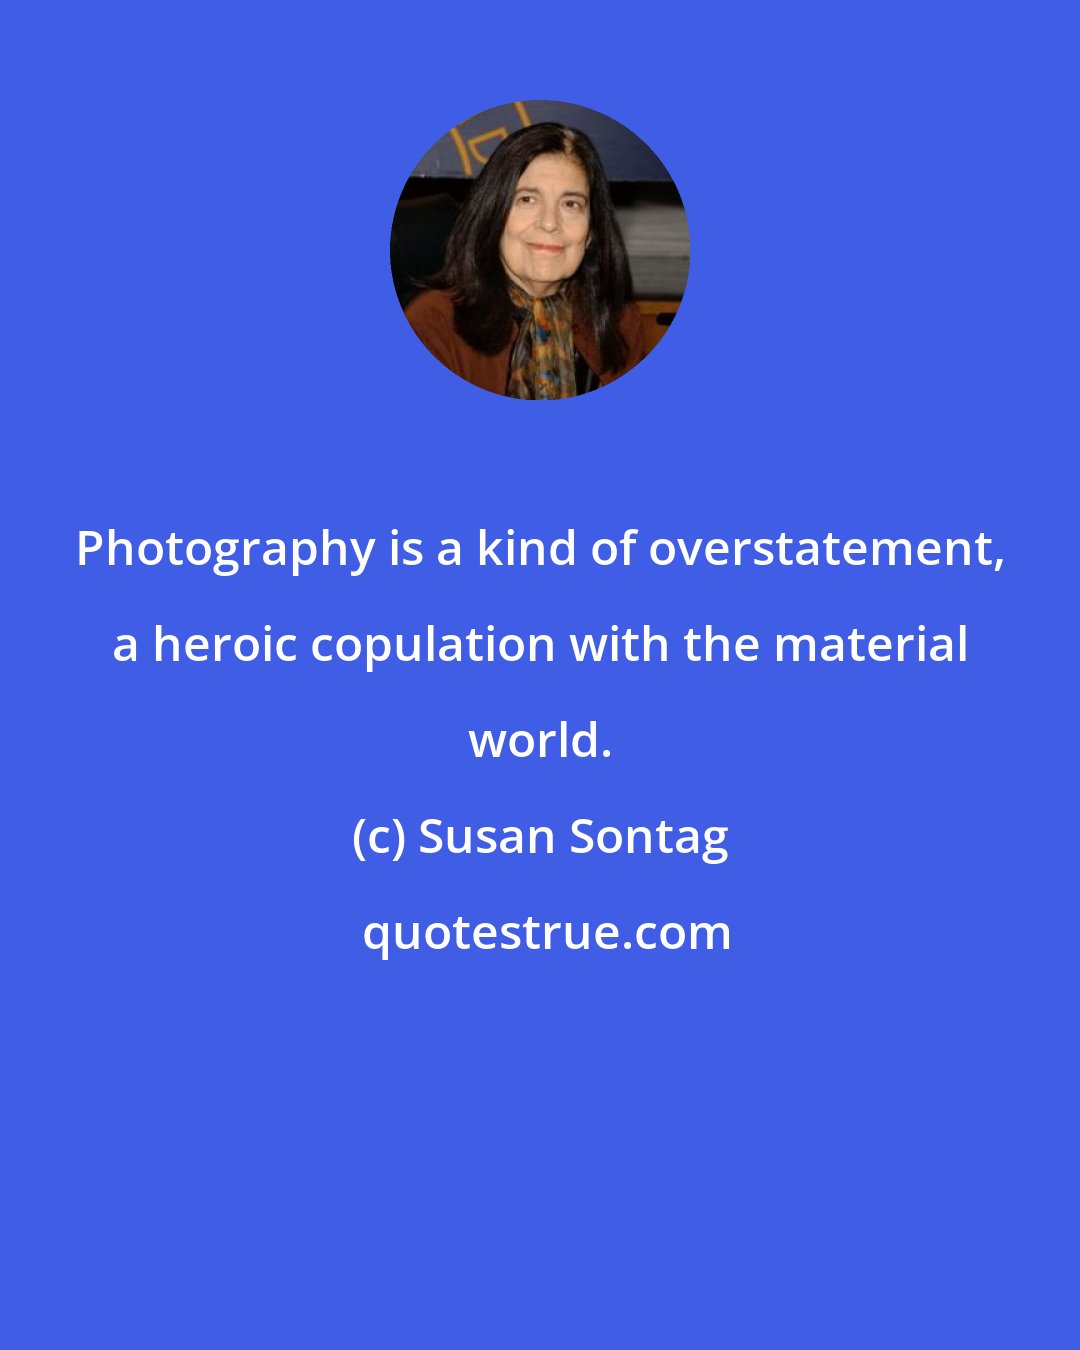 Susan Sontag: Photography is a kind of overstatement, a heroic copulation with the material world.